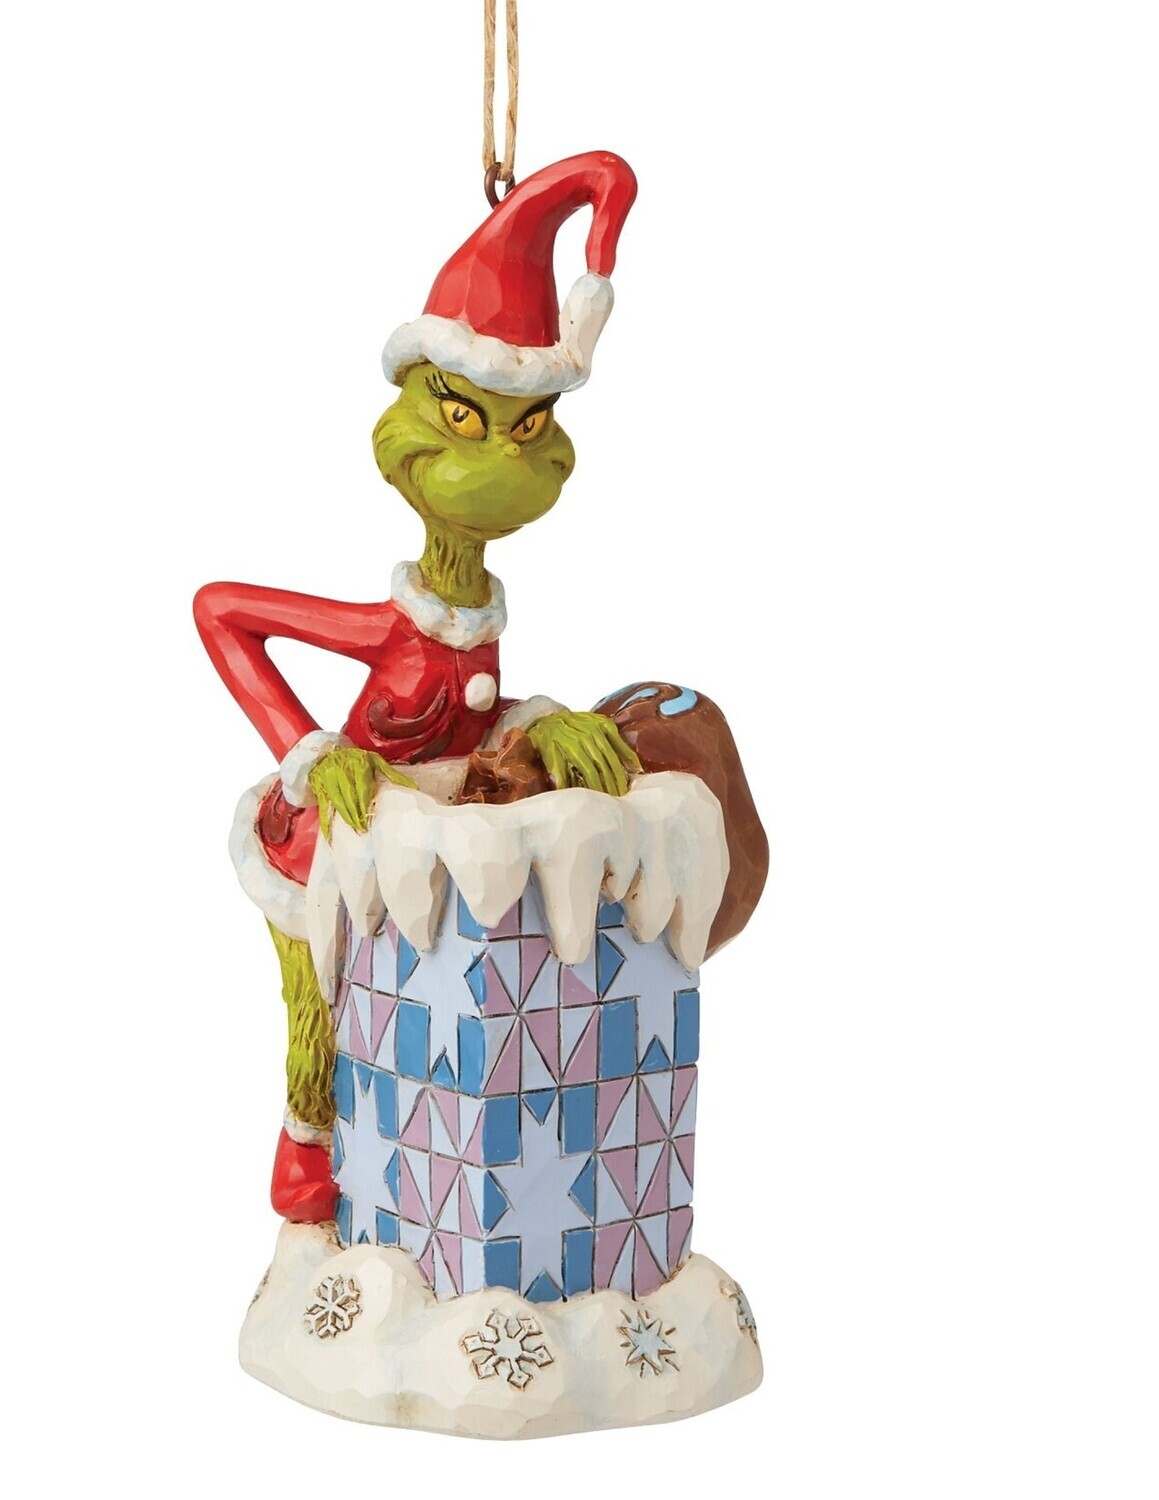 Department 56 Jim Shore "Grinch in Chimney" Ornament (6009204)